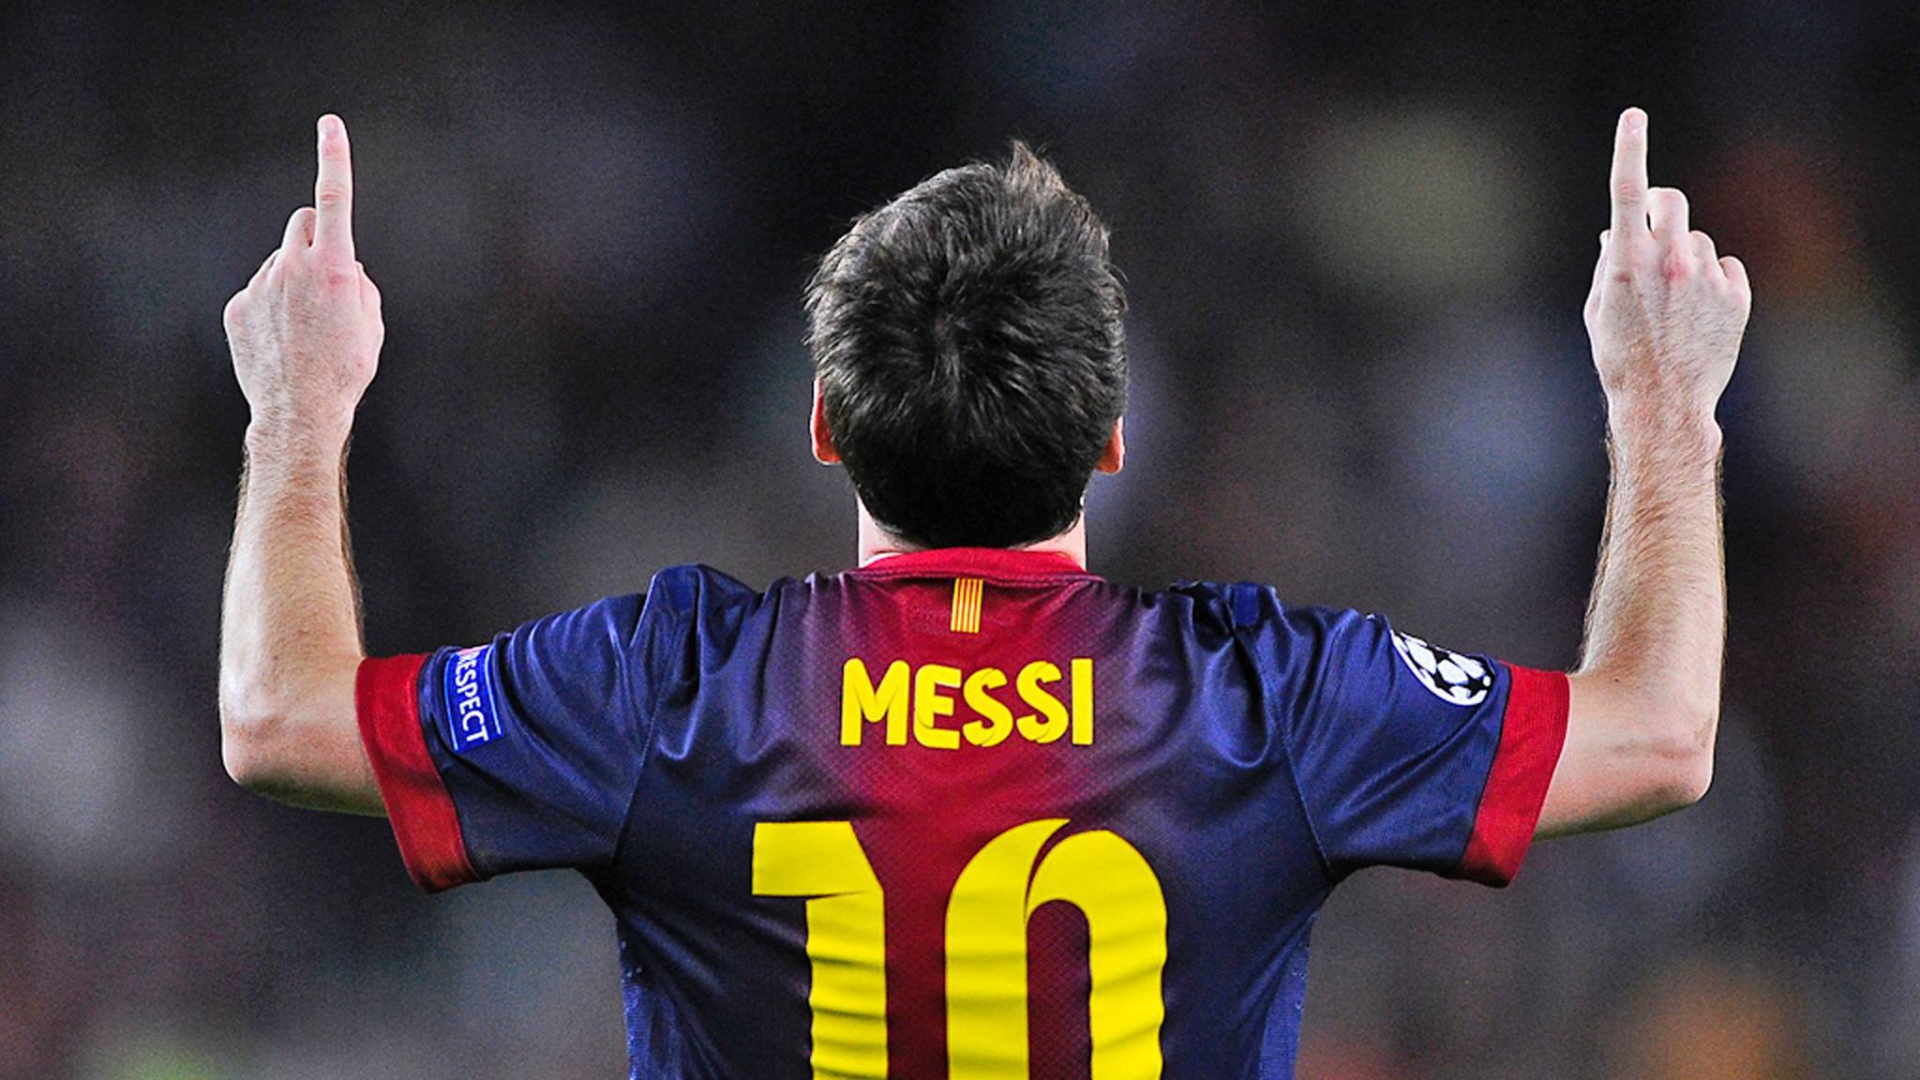 The player of Barcelona Lionel Messi